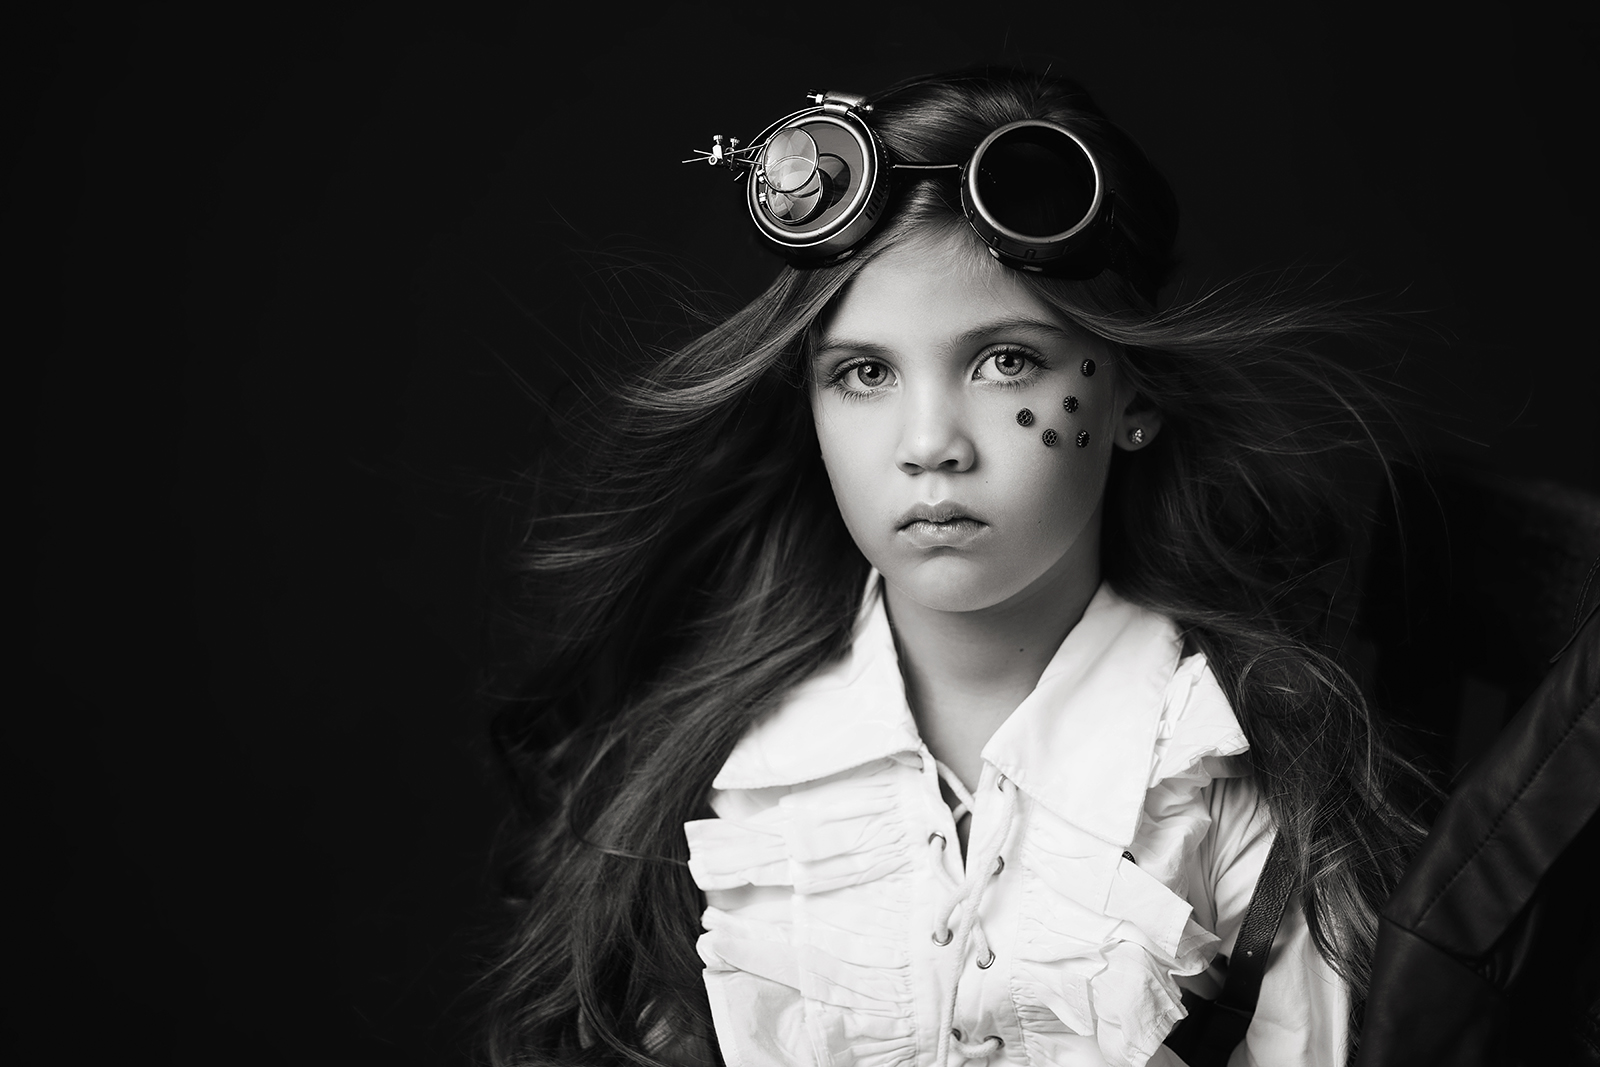 steampunk image for a child's modeling portfolio